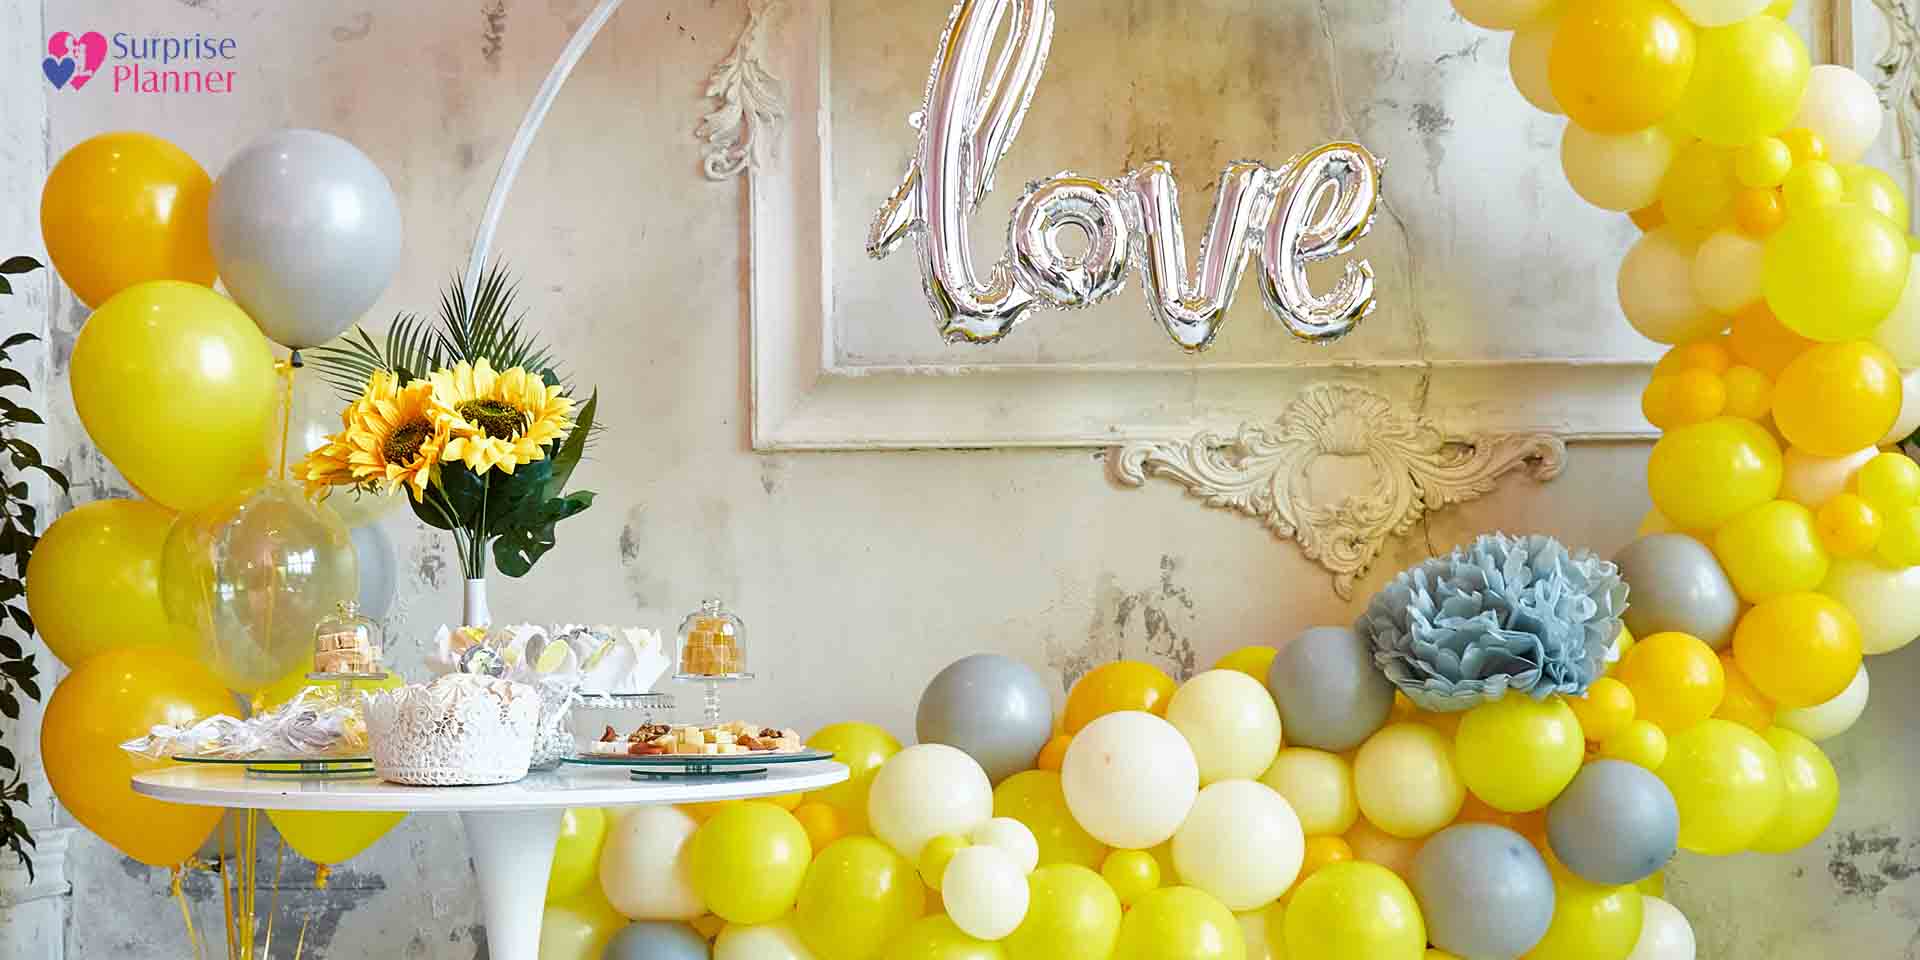 Top 10 Creative Balloon Decorations Ideas and Inspiration